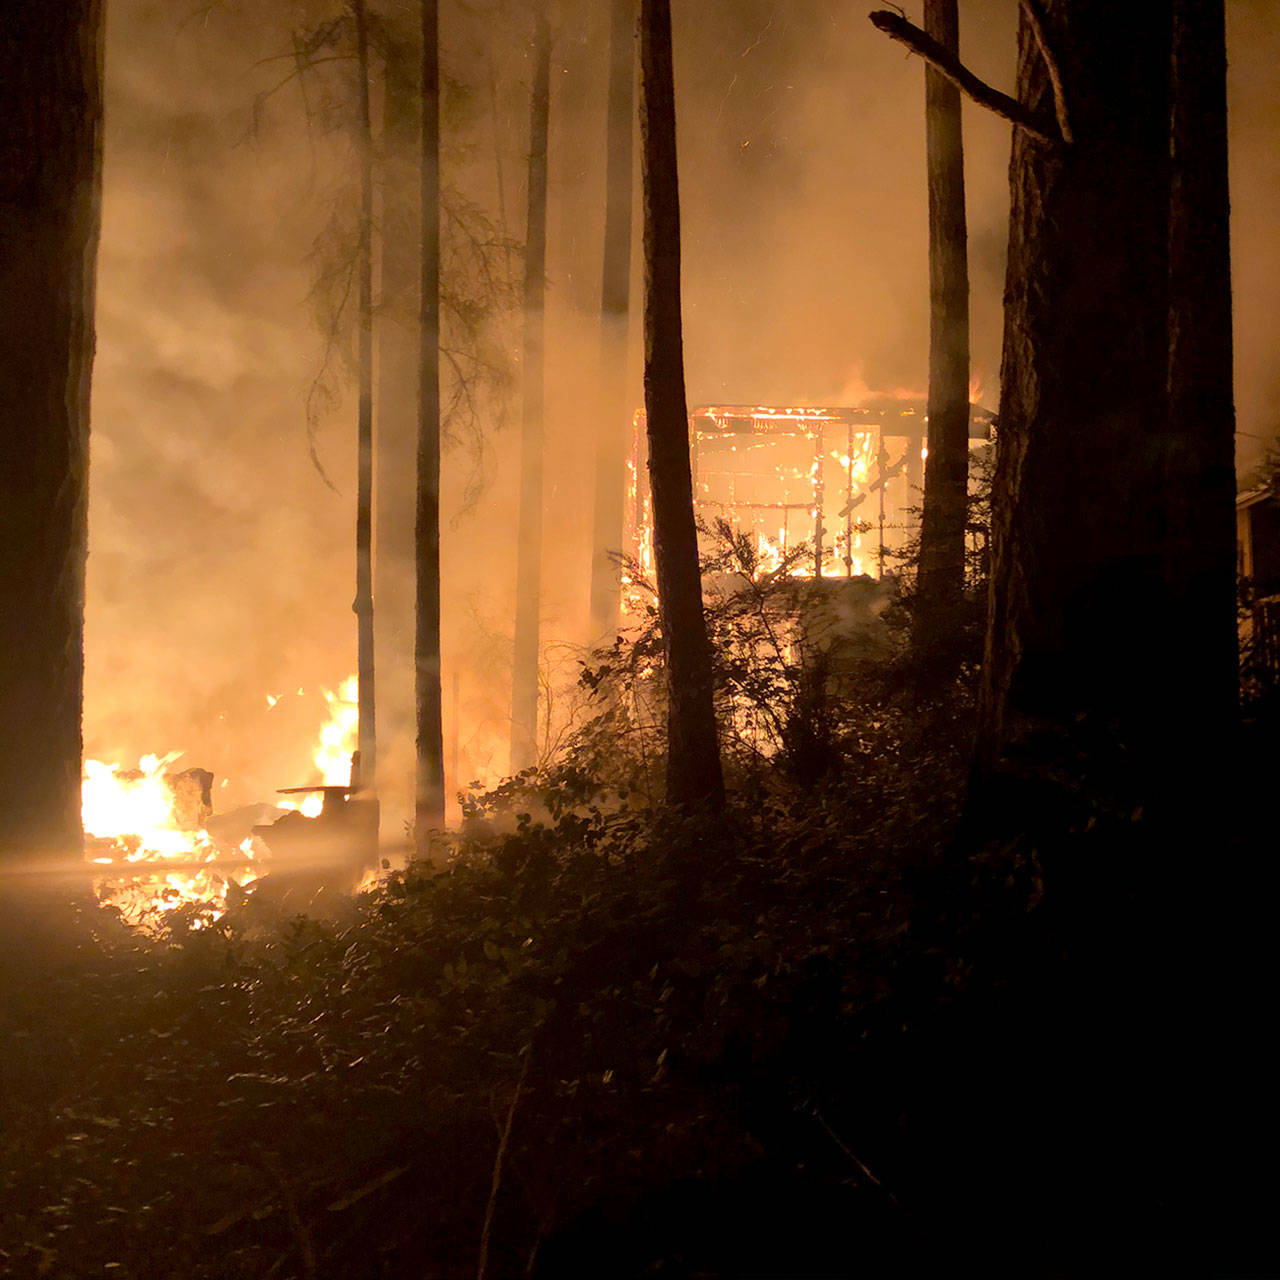 Firefighters work to put out a fire on Alder Street in Coyle on Monday night. (Jefferson County Sheriff’s Office)